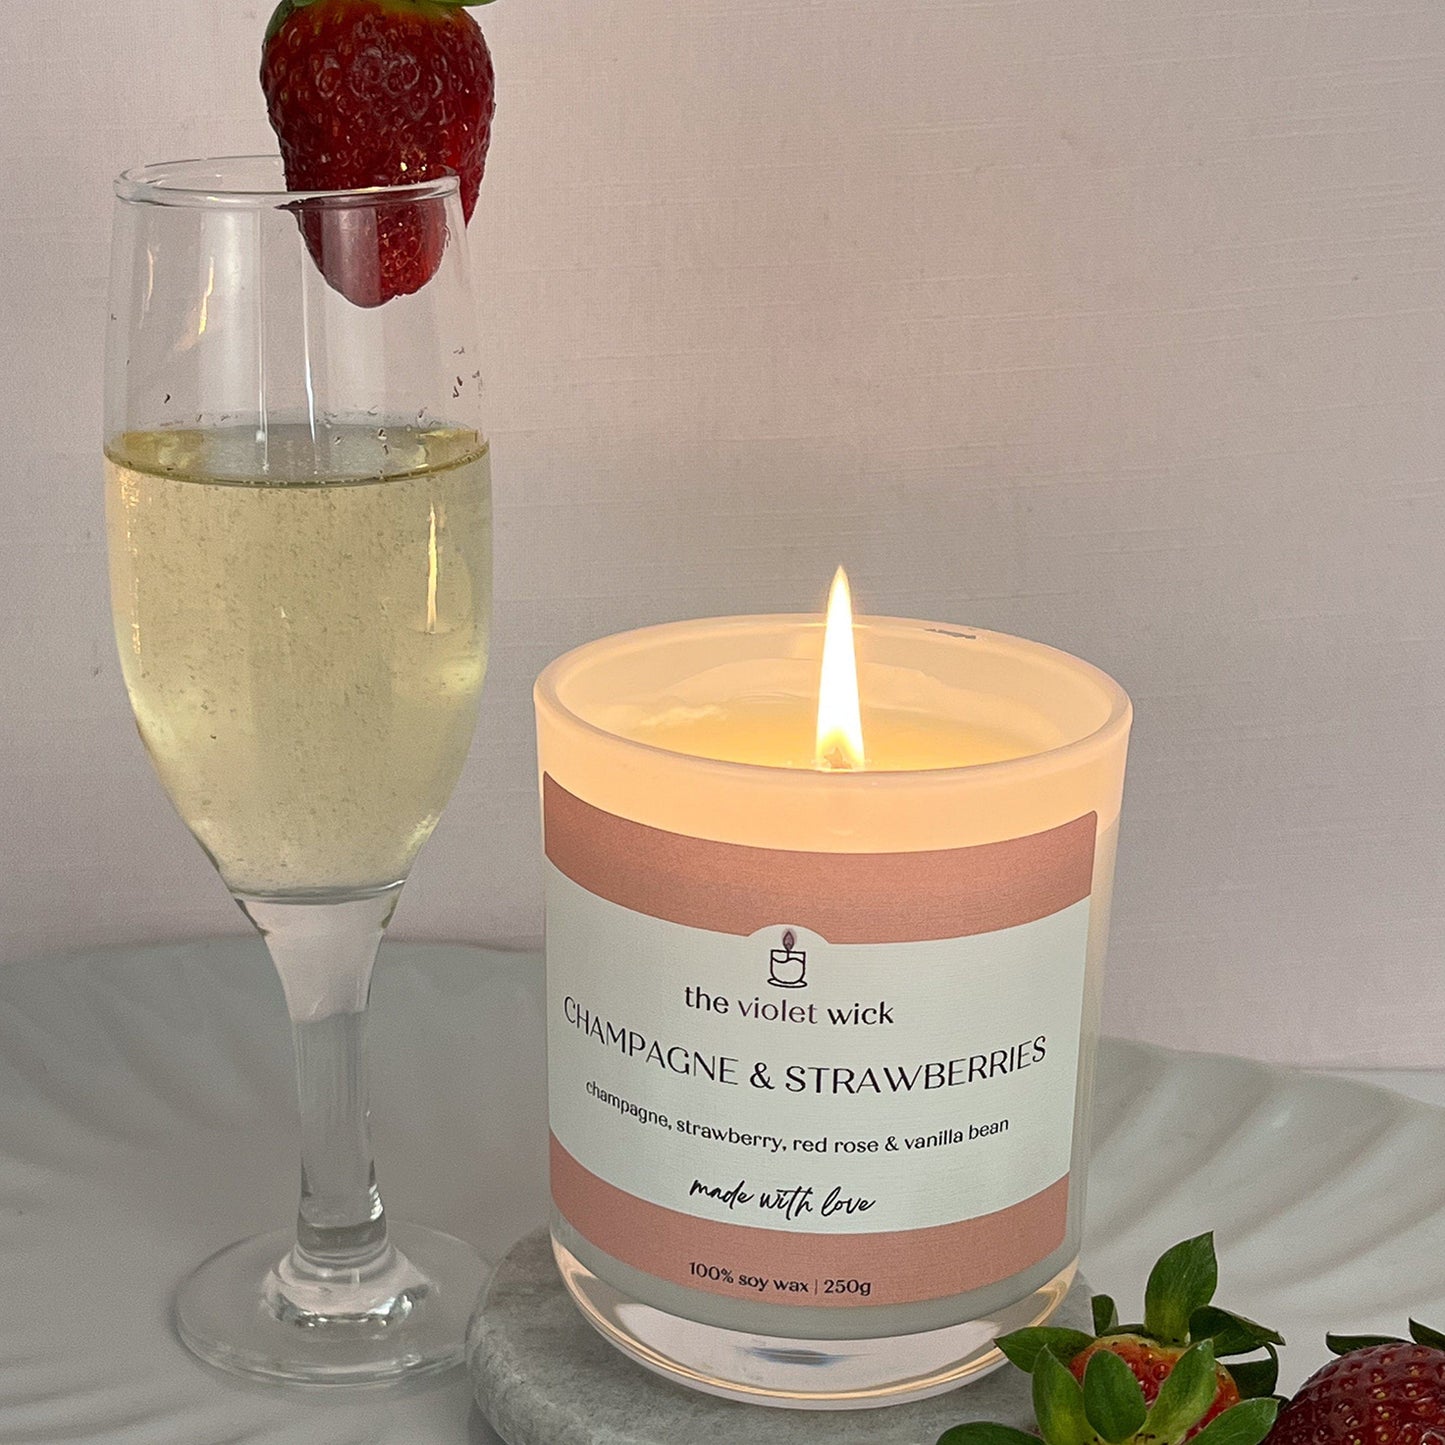 Champagne &. Strawberries scented soy candle from The Violet Wick in a glass jar in a serving plate with glass of champagne surrounded by strawberries, 250g.